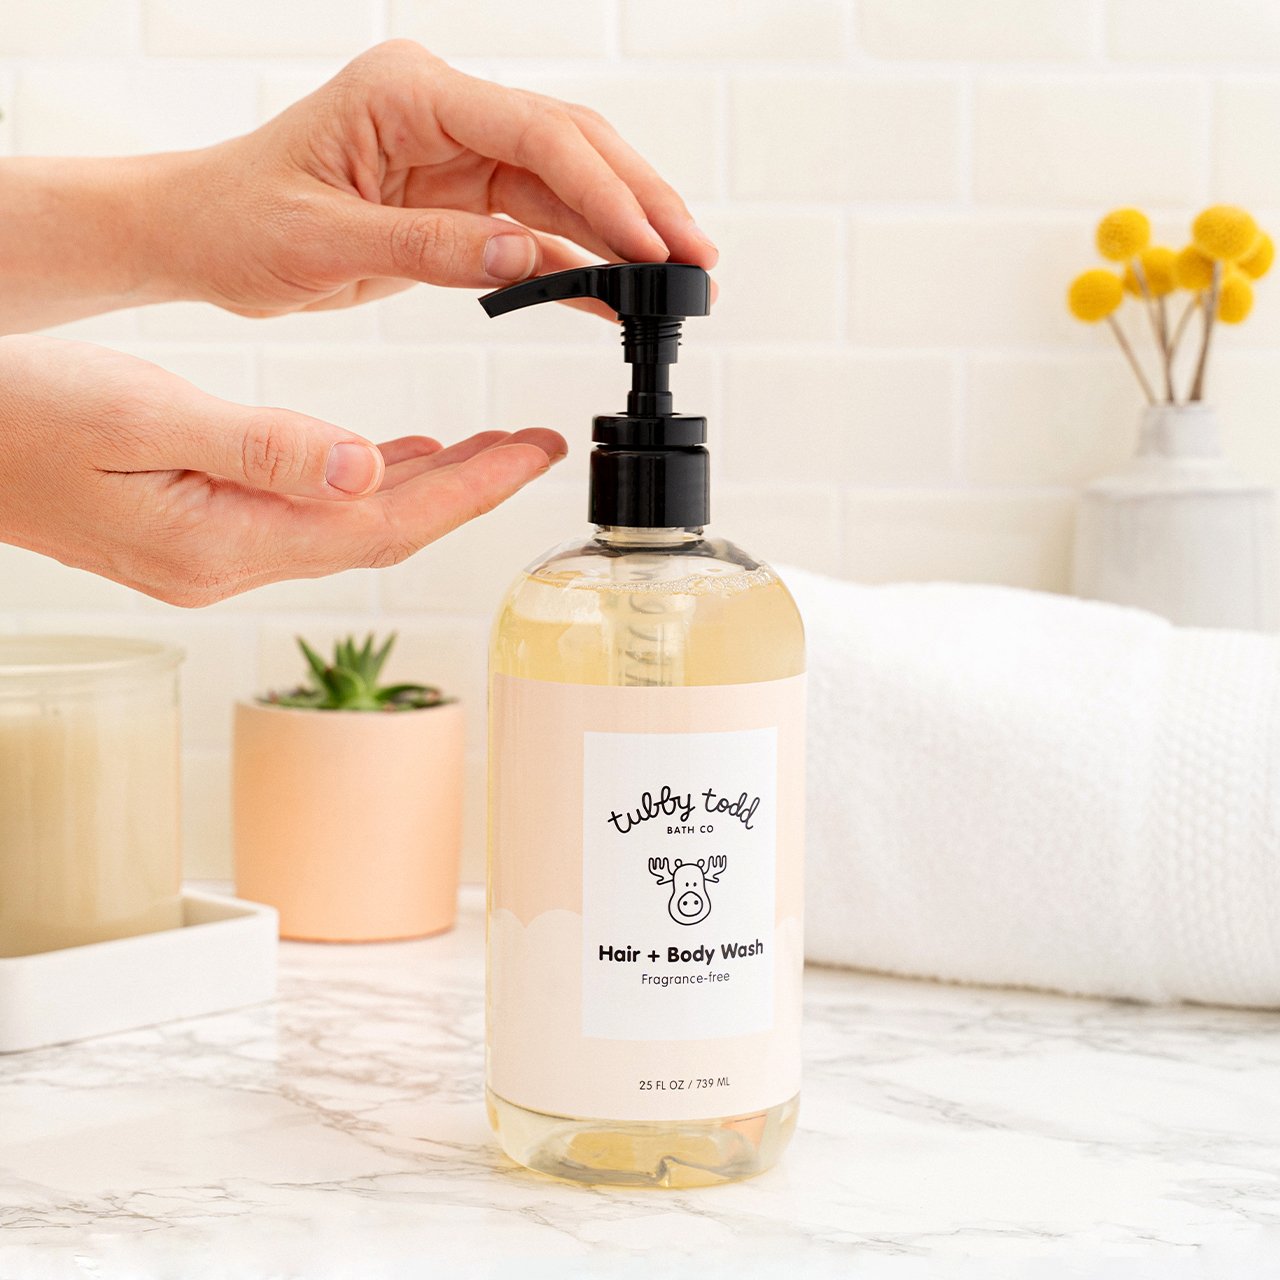 Fragrance-free Hair + Body Wash being used next to bathroom sink